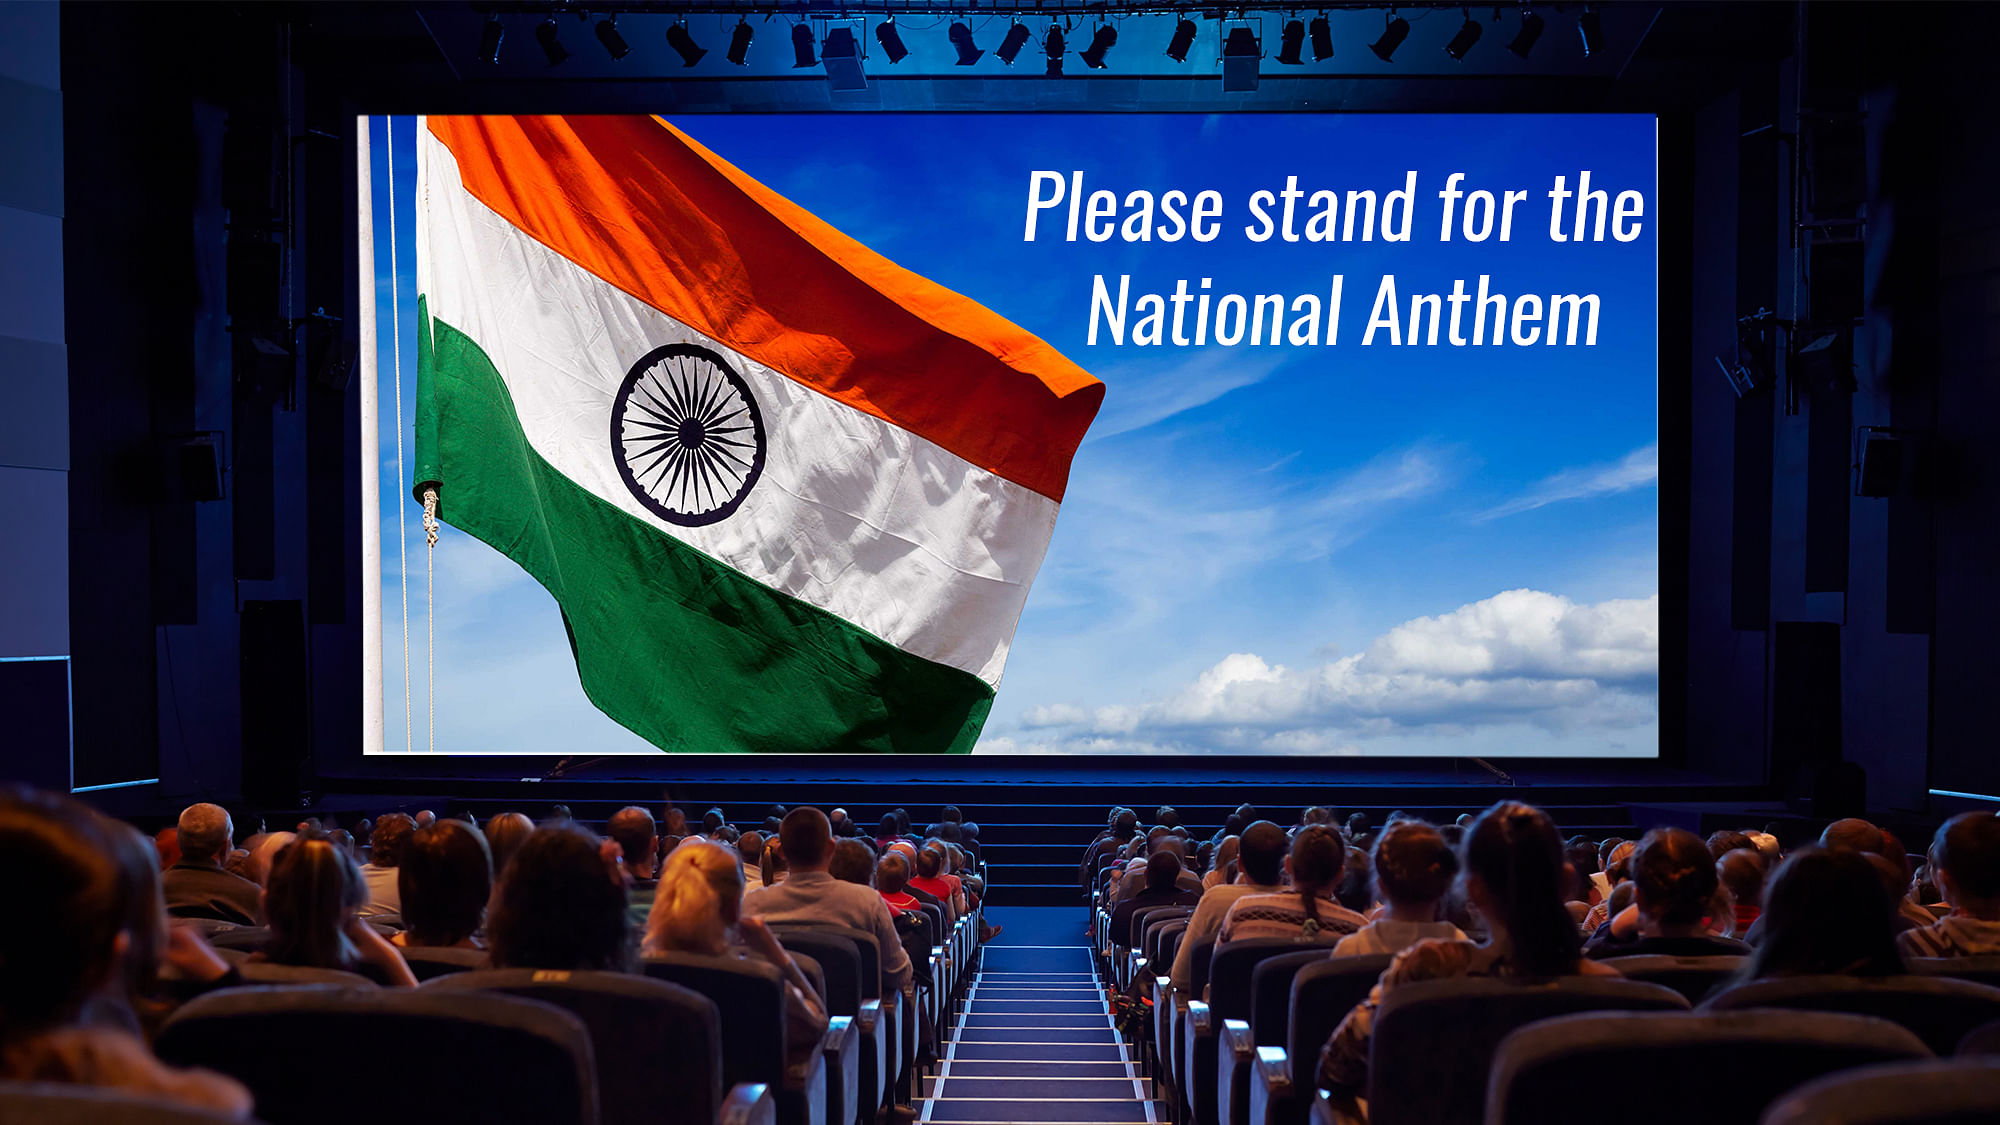 The Supreme Court reviews the previous order that made it compulsory for cinema-goers to stand for the national anthem in theatres.